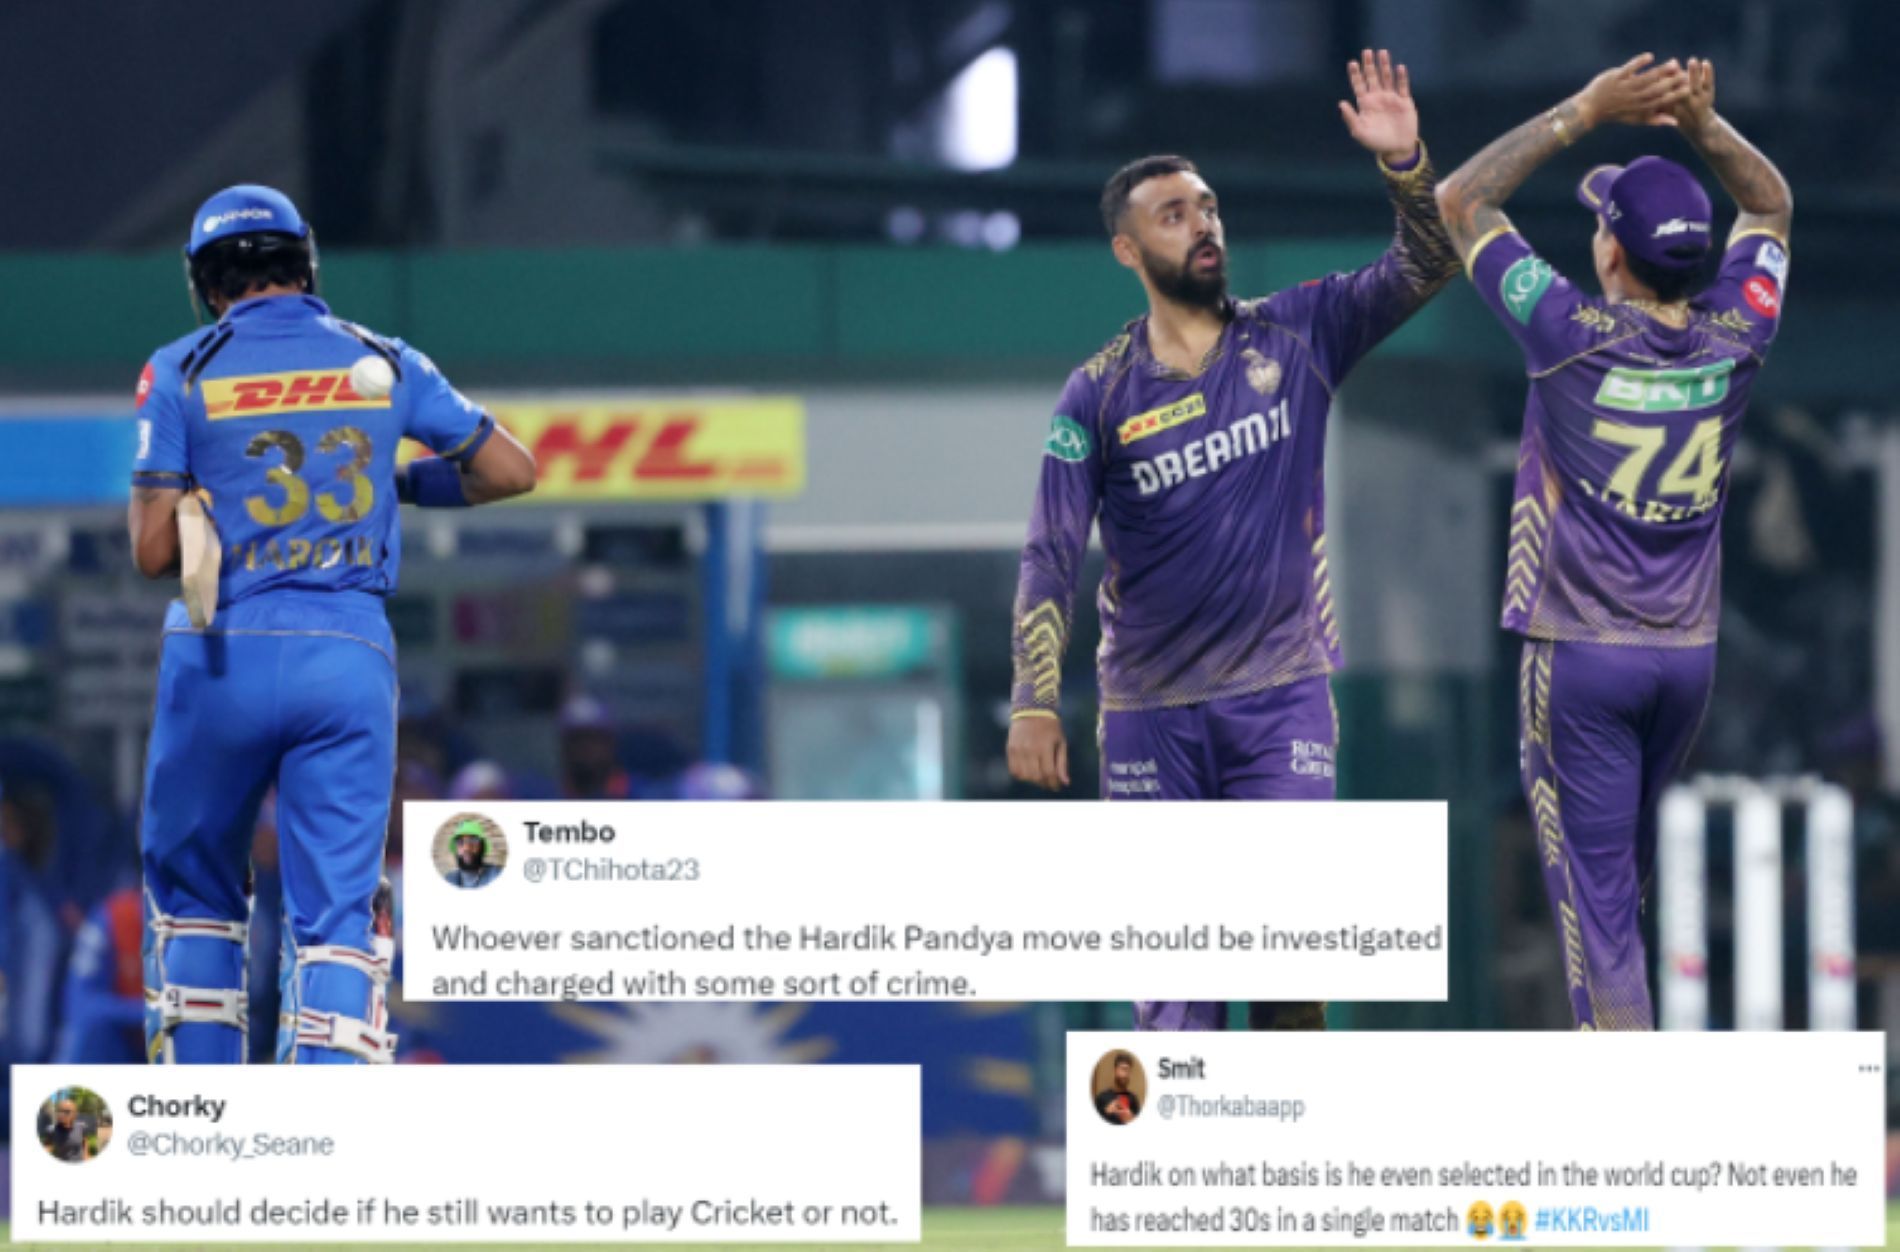 Hardik fell cheaply once again in the KKR clash [Credit: IPL Twitter handle]